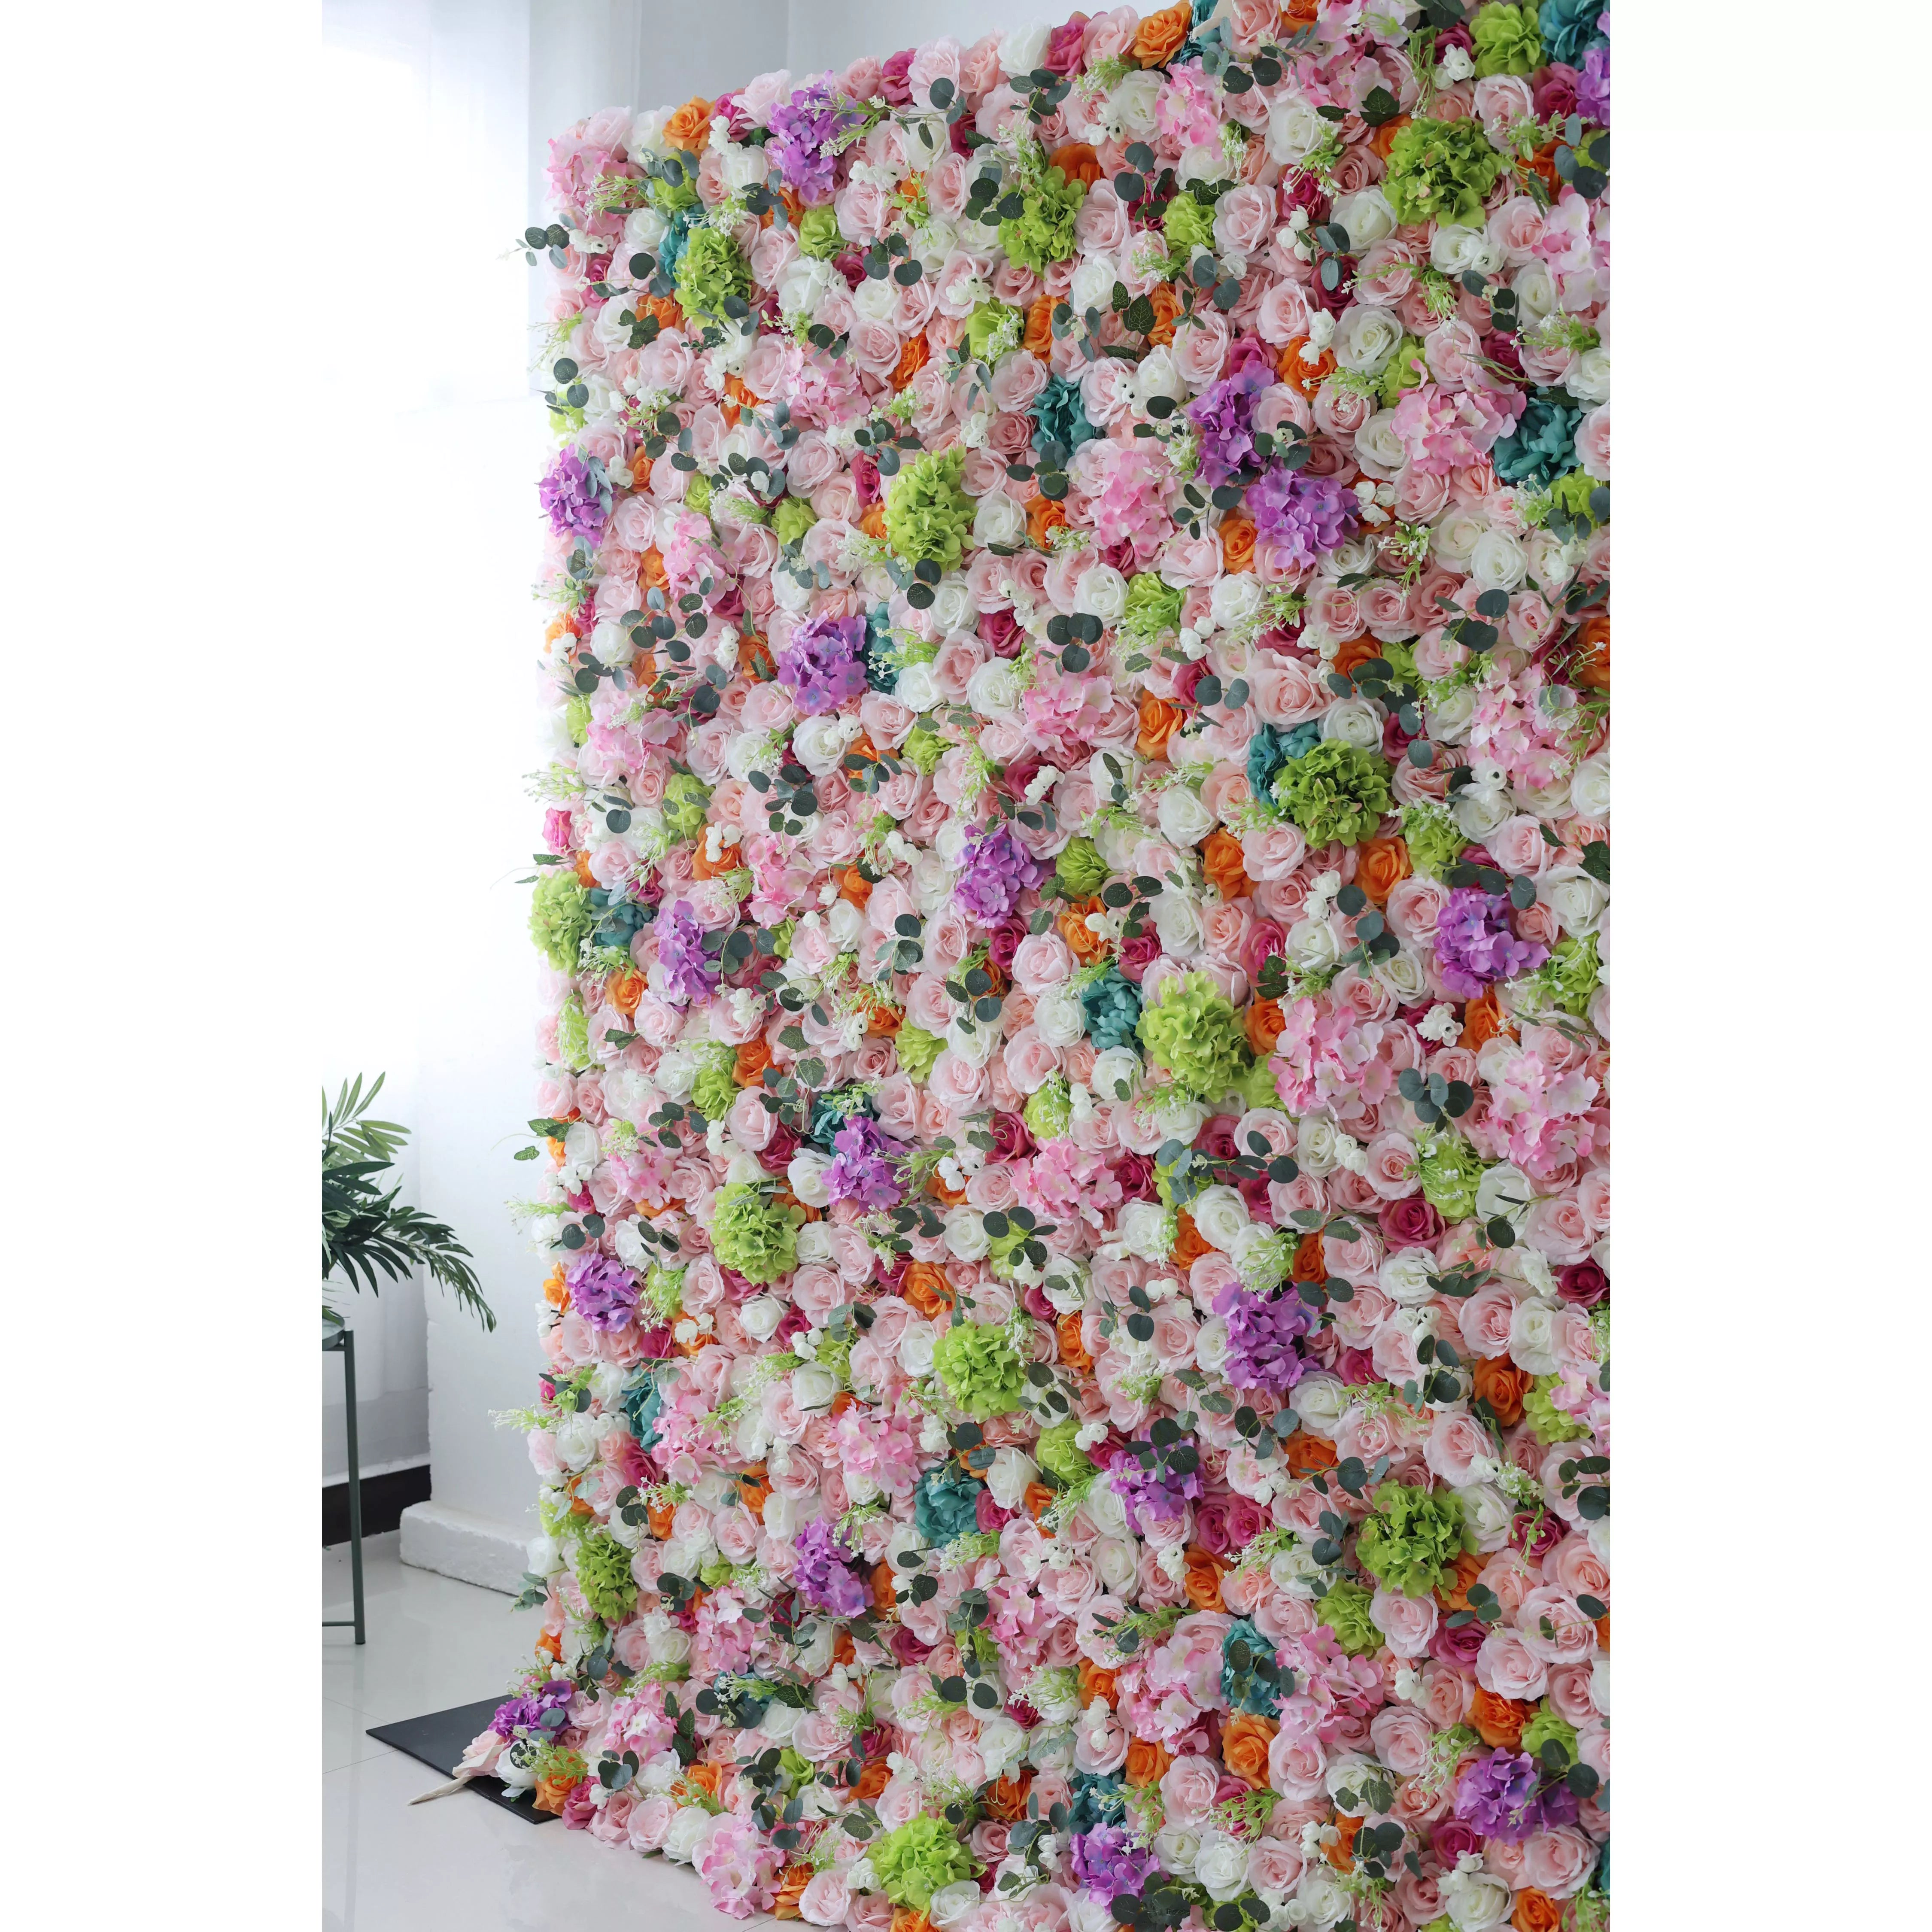 ValarFlower Artificial Floral Wall Backdrop: Enchanted Garden Gala - A Dazzling Dance of Delicate Hues and Vibrant Blooms.-VF-248